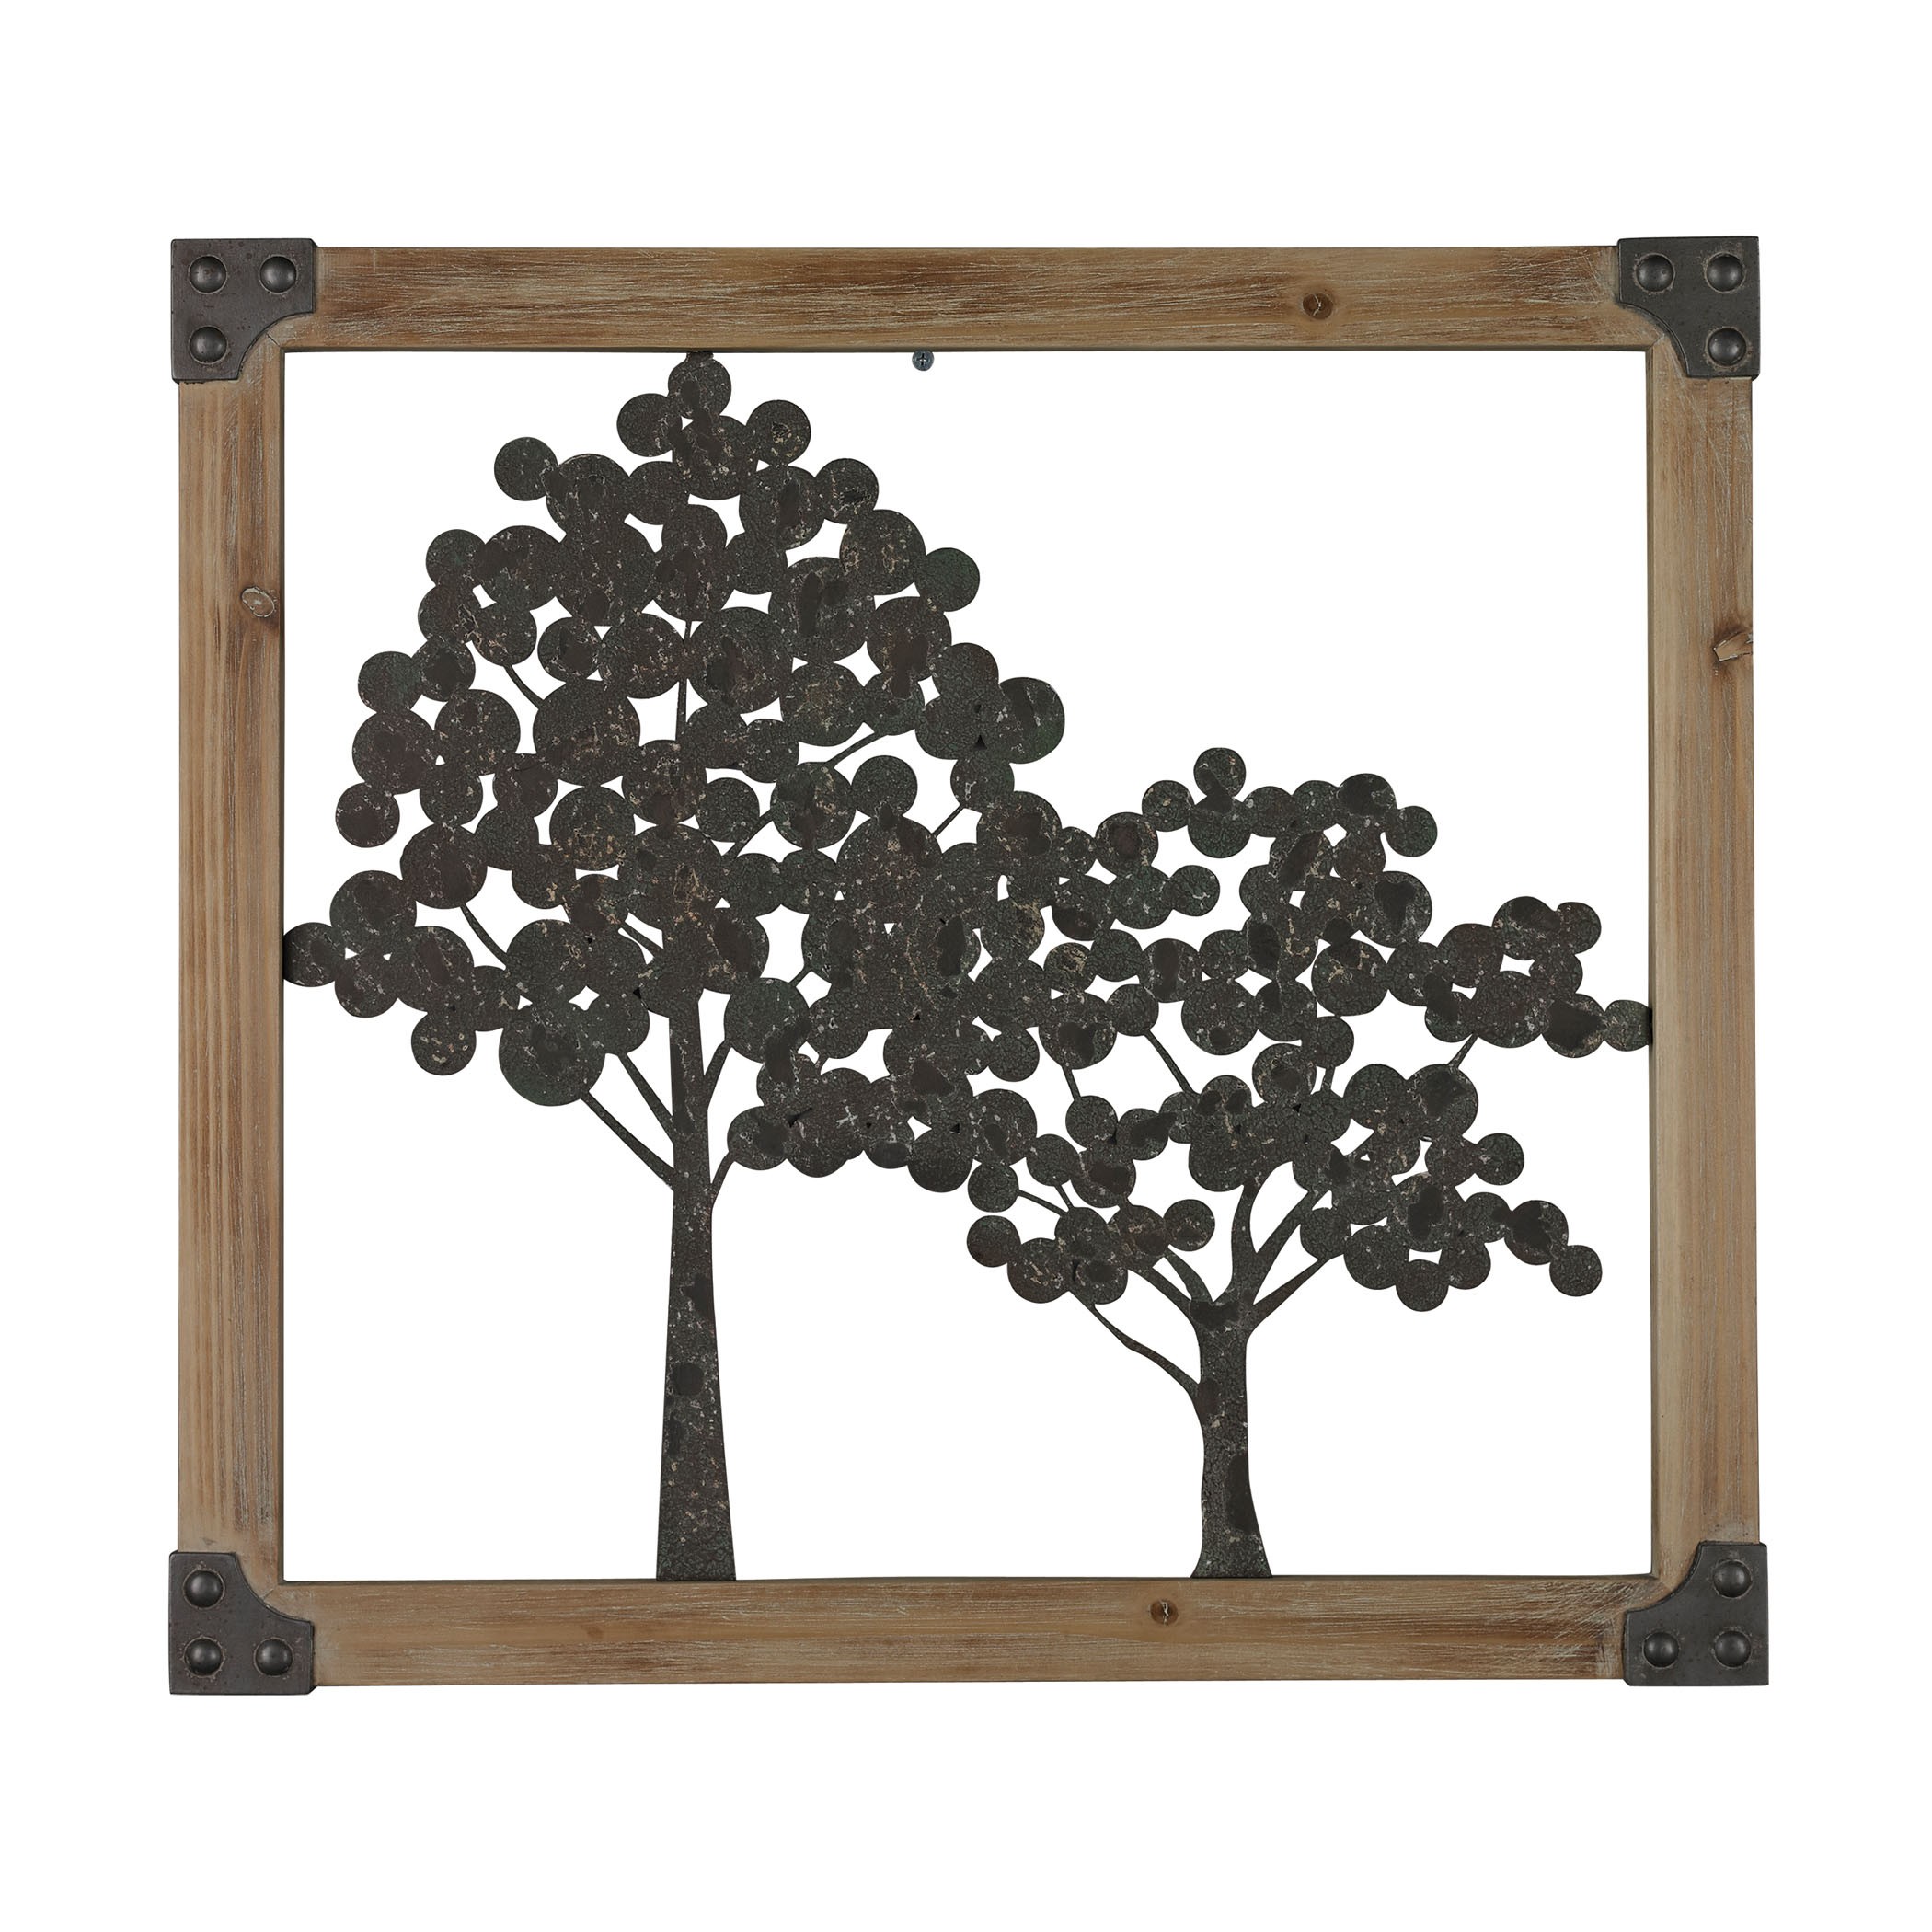 Sherwood-Tree Wall Decor In Natural Wood Frame